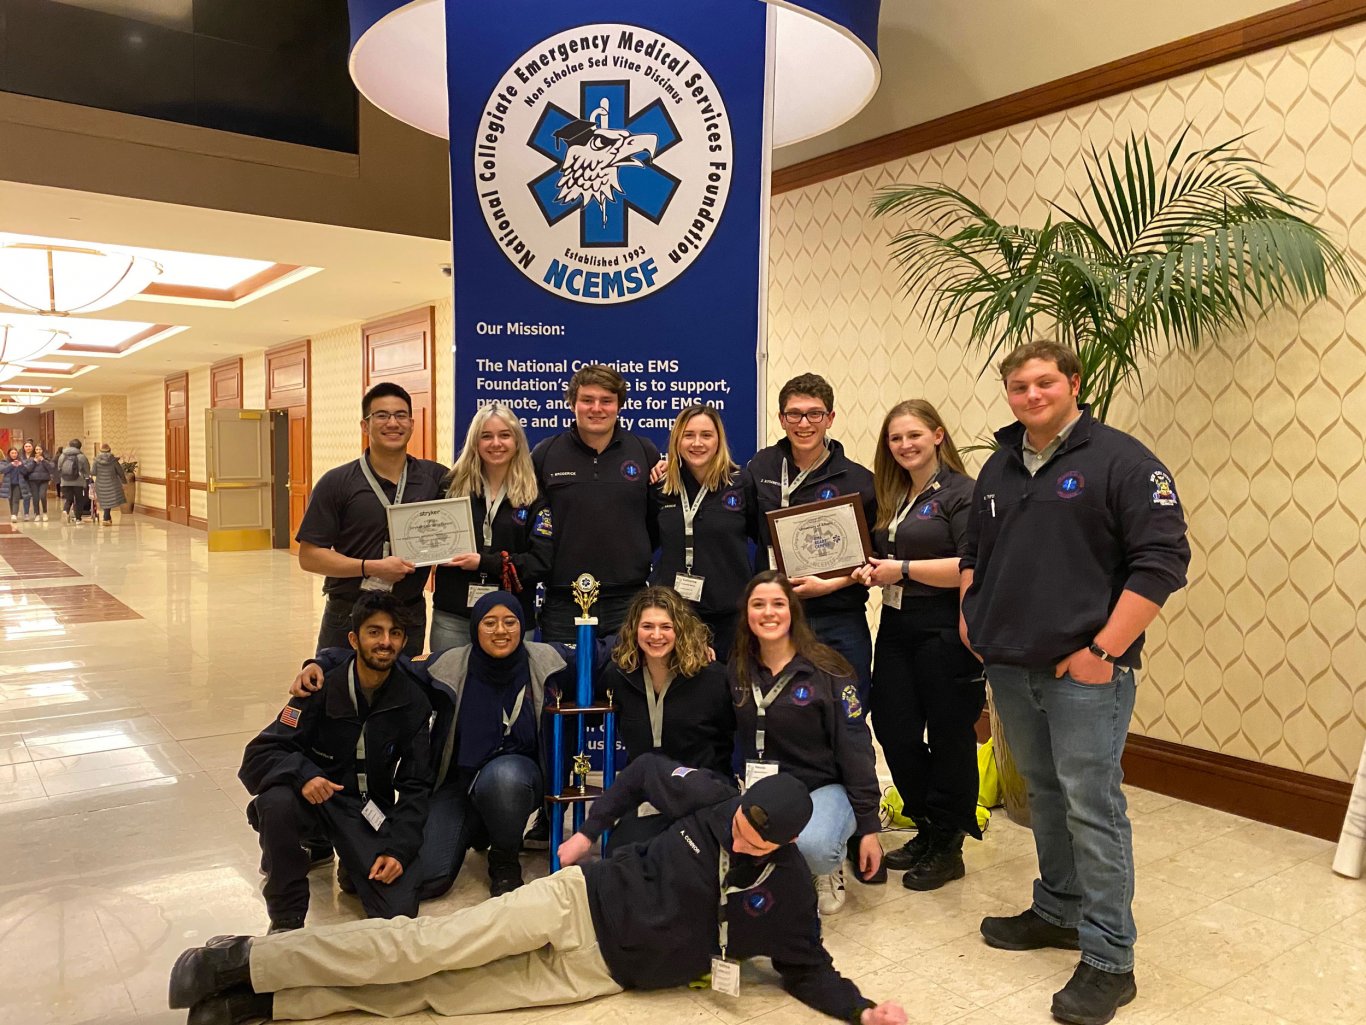 Twelve Five Quad volunteers pose for a photo with plaques and a trophy in front of a National Collegiate EMS Foundation sign